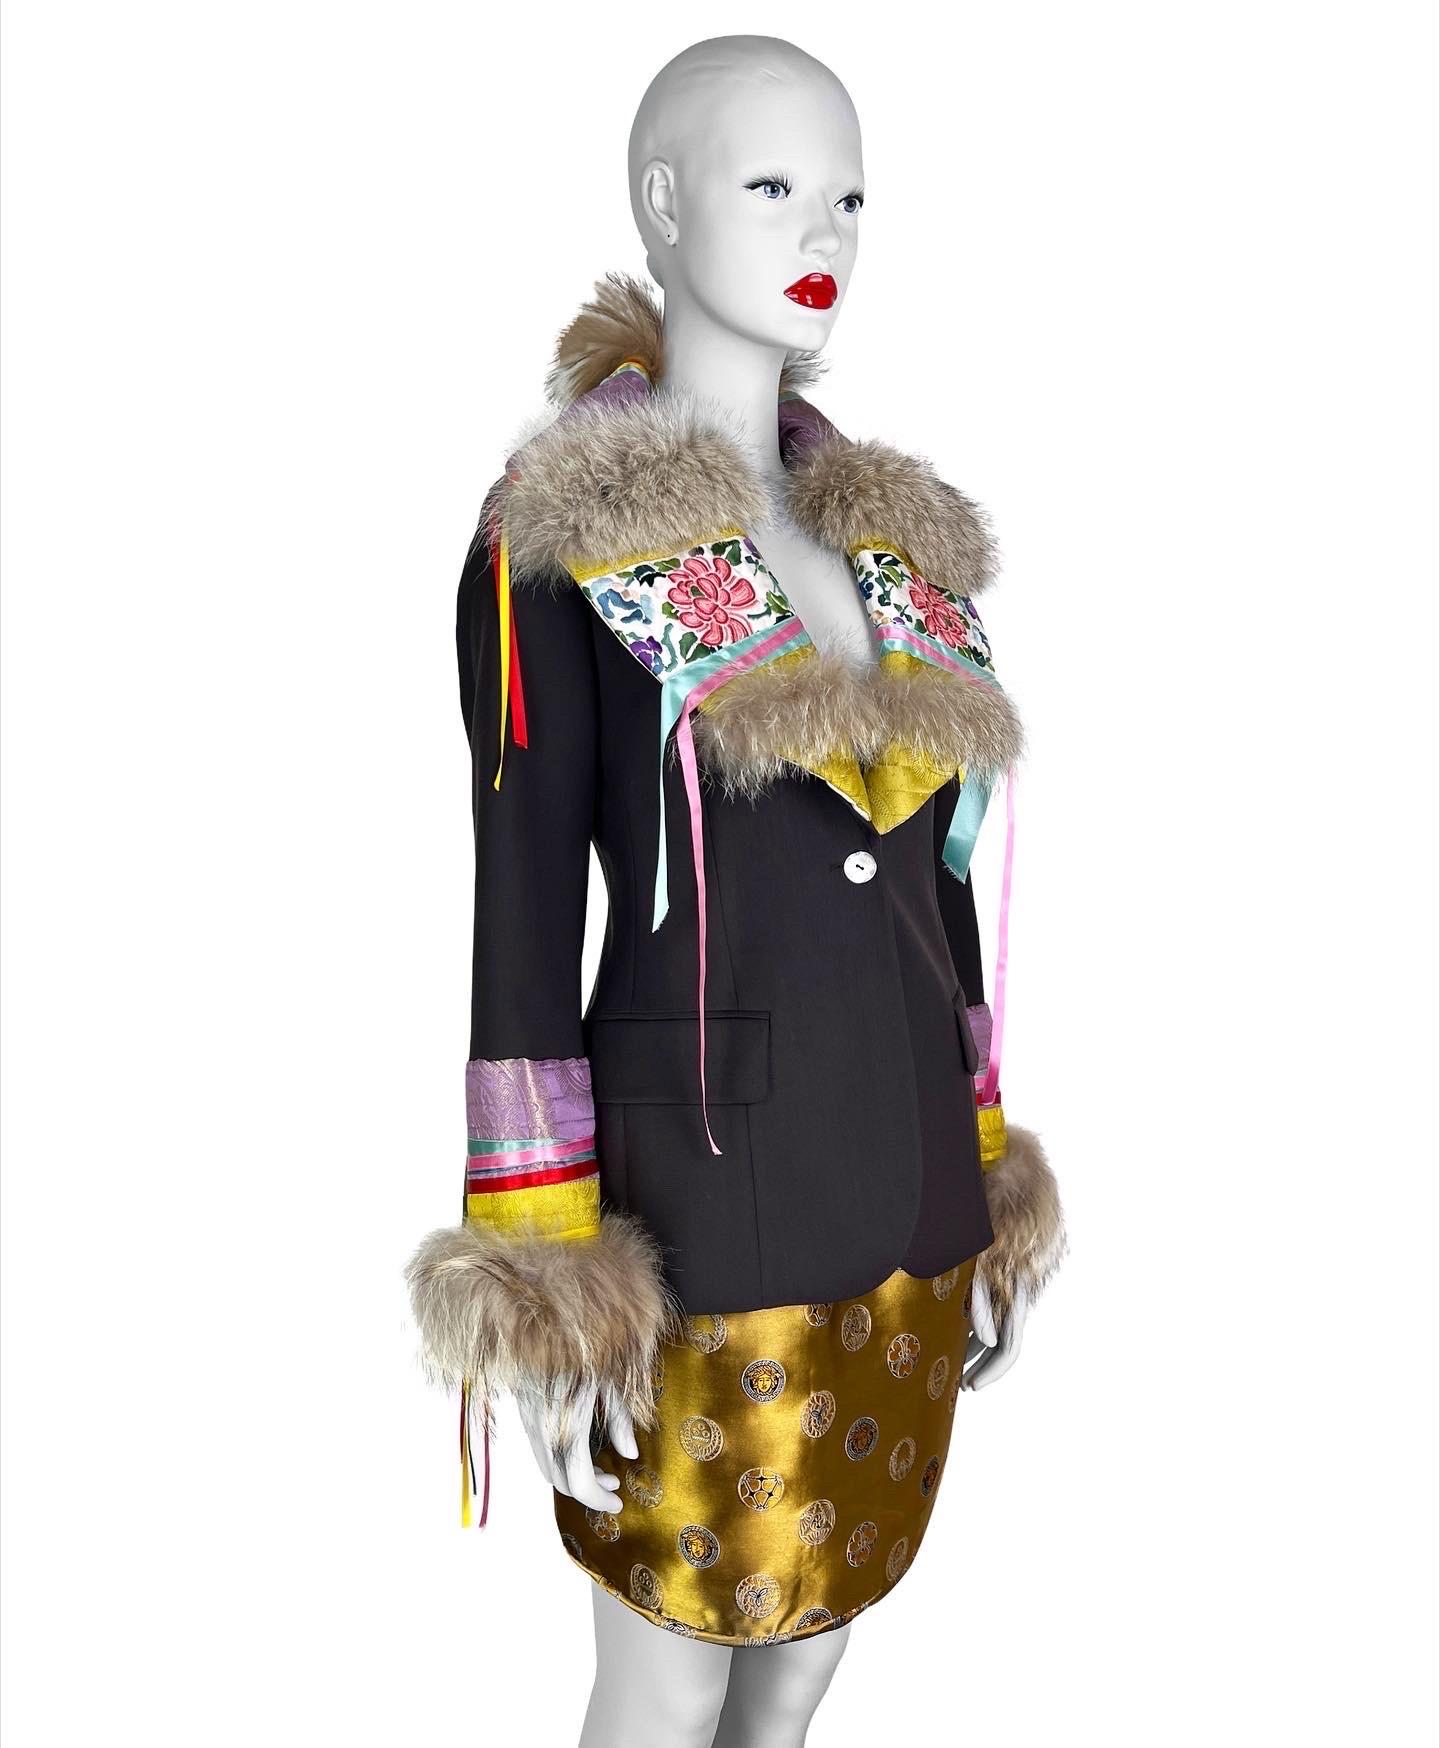 An outstanding John Galliano blazer with Coyote fur trim details and gorgeous patchwork with embroidery and decorative silk ribbons. 

Size FR 38 or US 4. Measurements (flat lay on one side):

Shoulder to shoulder - 35 cm (13,8 in)
Armpit to armpit